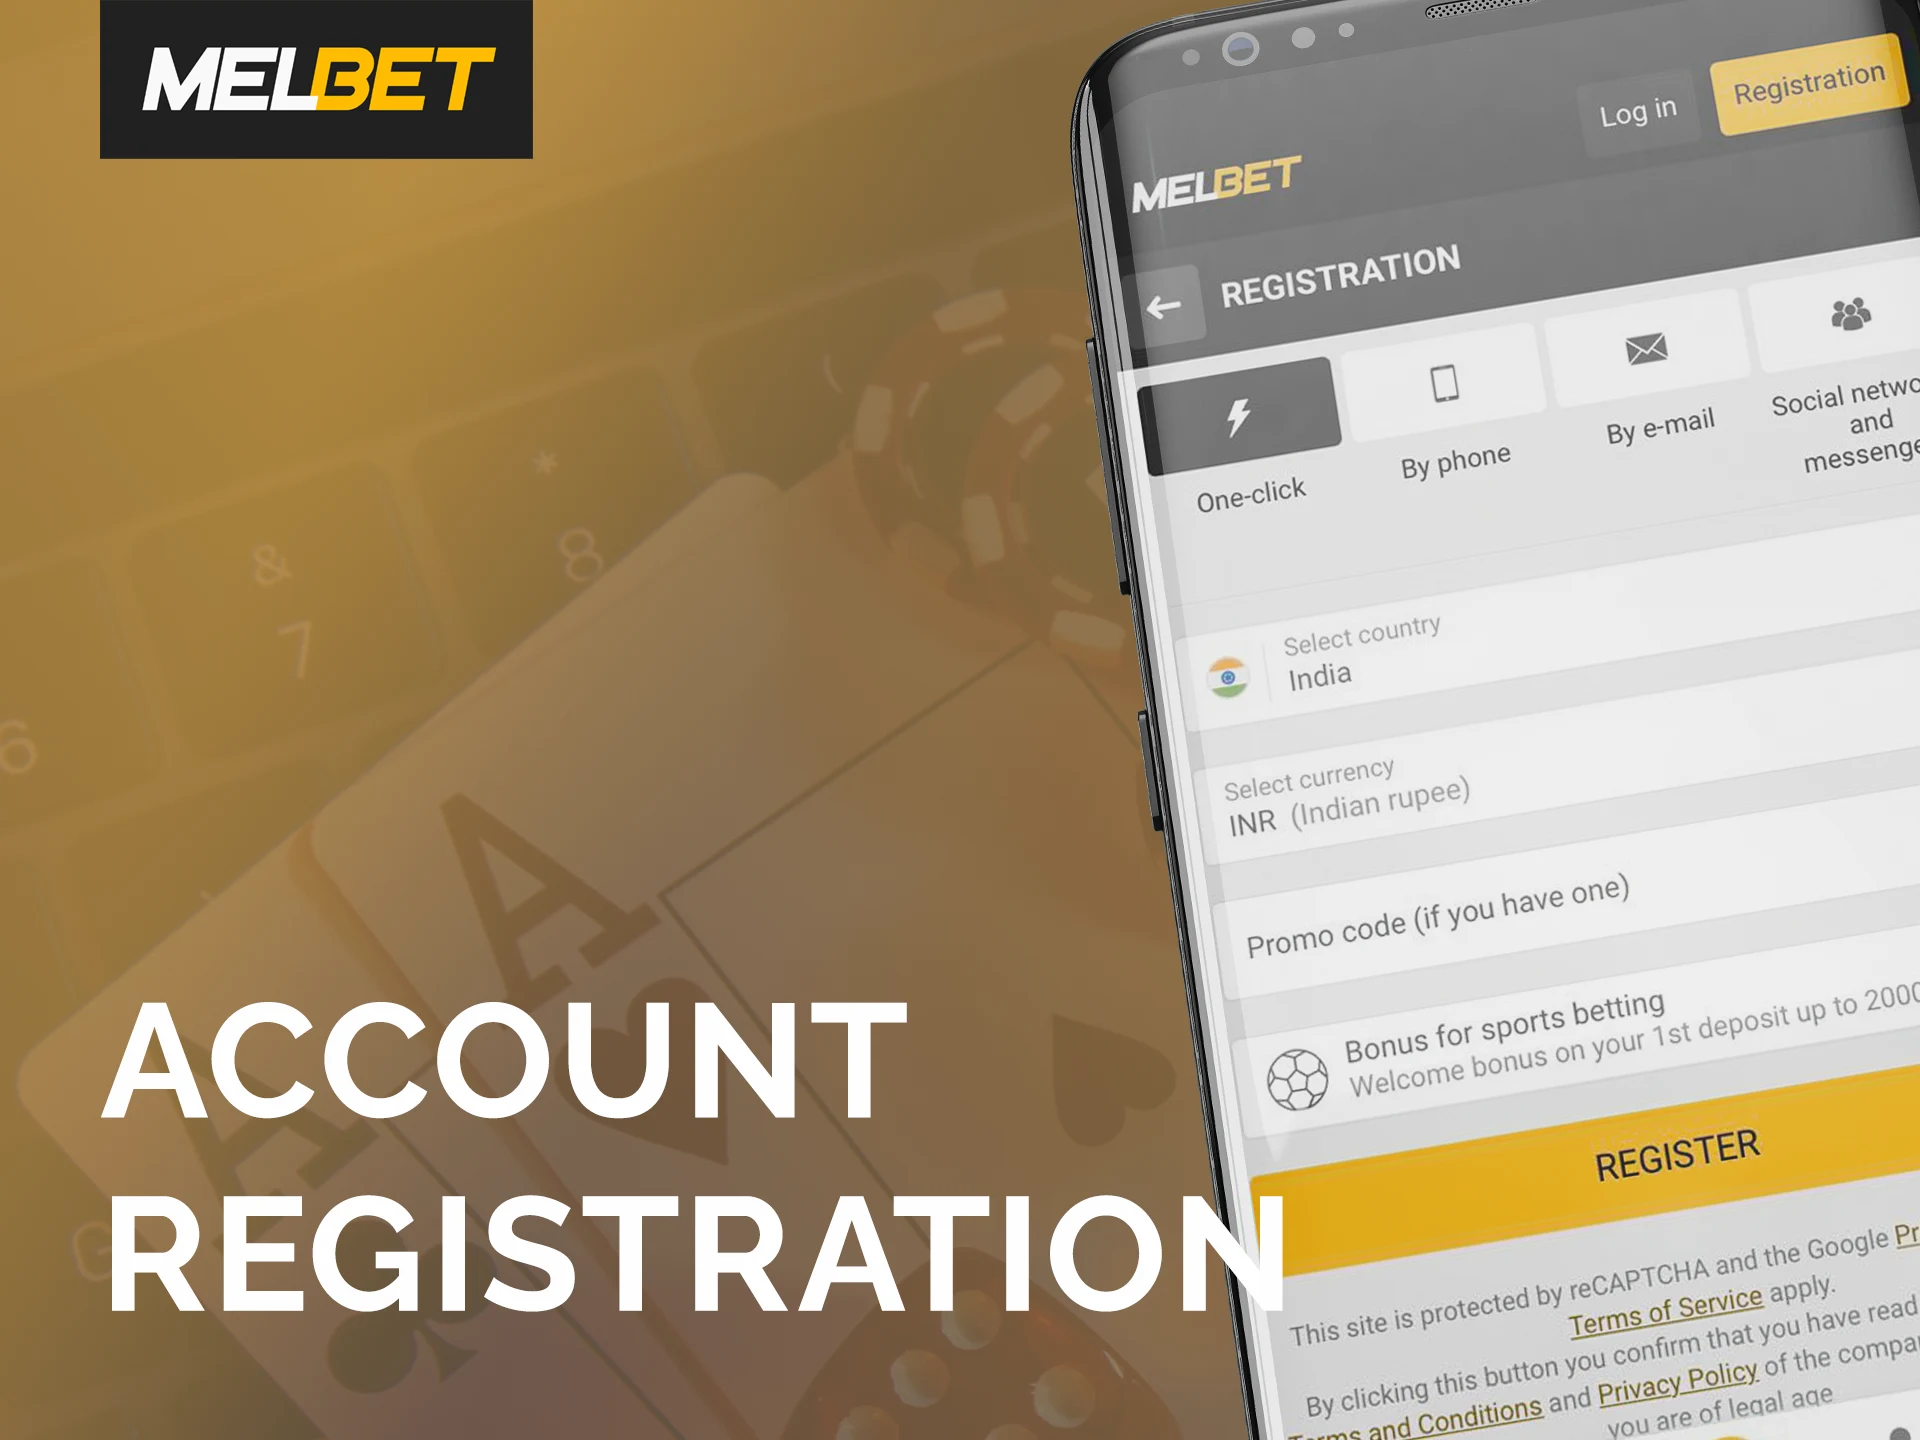 Register an account to get started with the Melbet app.